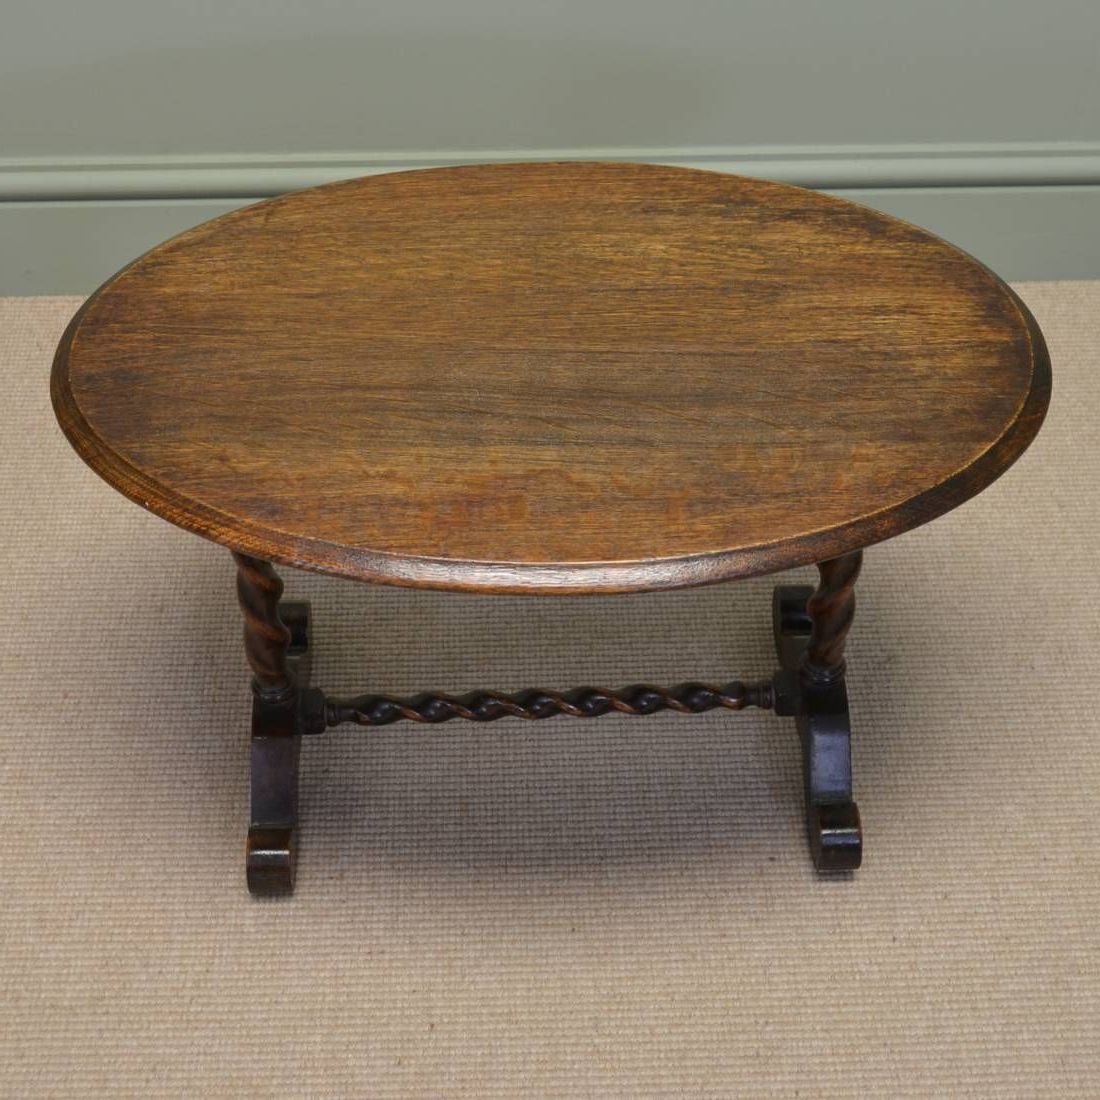 Oval Aged Black Iron Coffee Tables Throughout Most Recent Small Oval Oak Antique Coffee Table Antiques World (View 19 of 20)